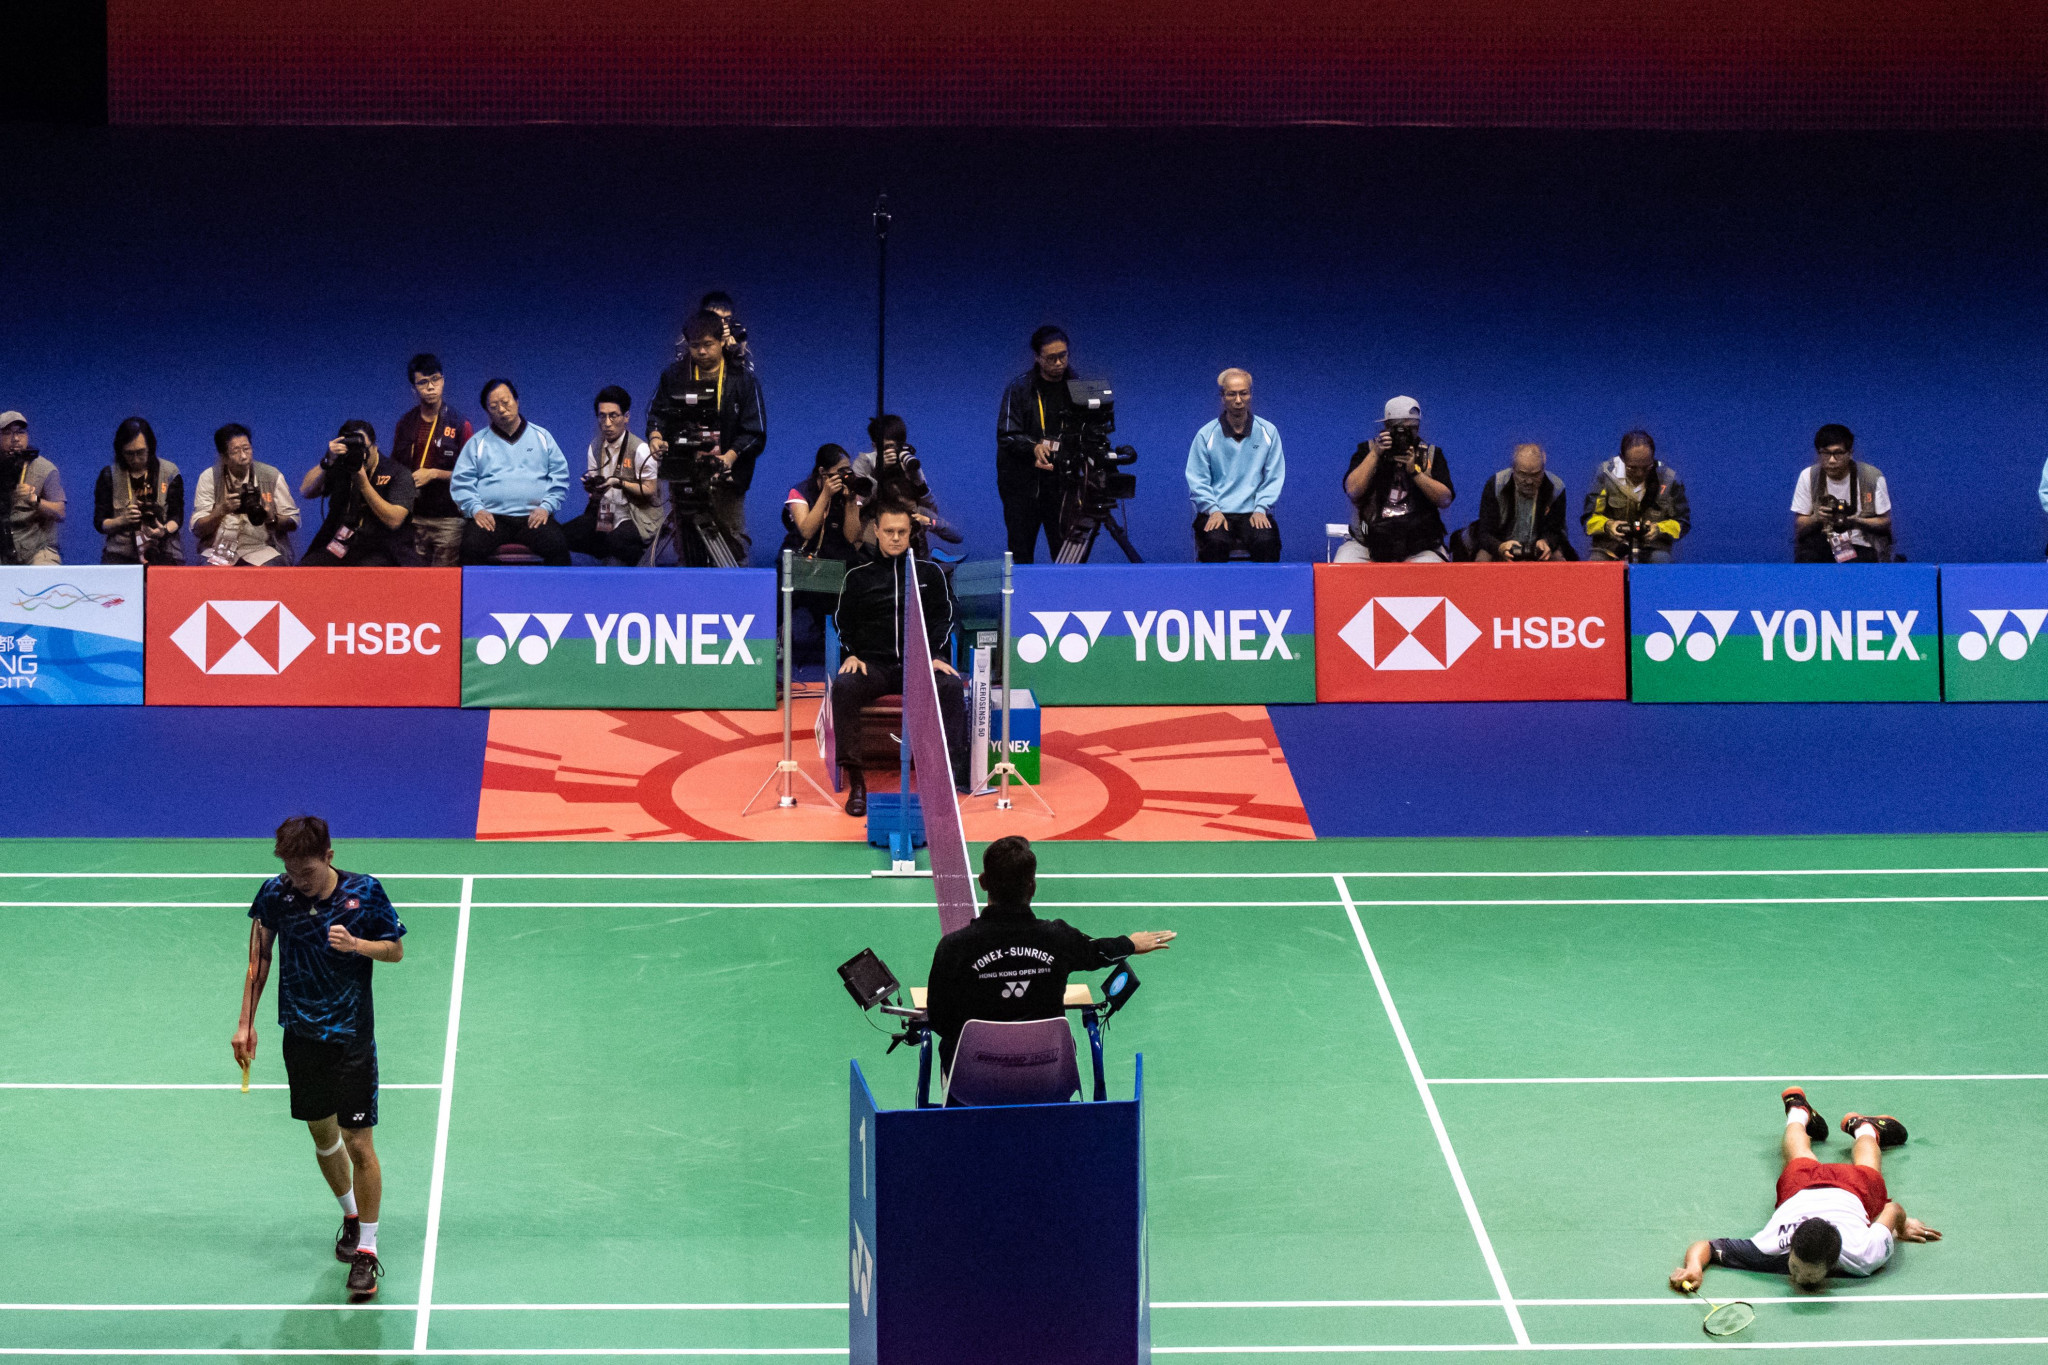 The Hong Kong Open has not been held since 2019 due to the COVID-19 pandemic ©Getty Images